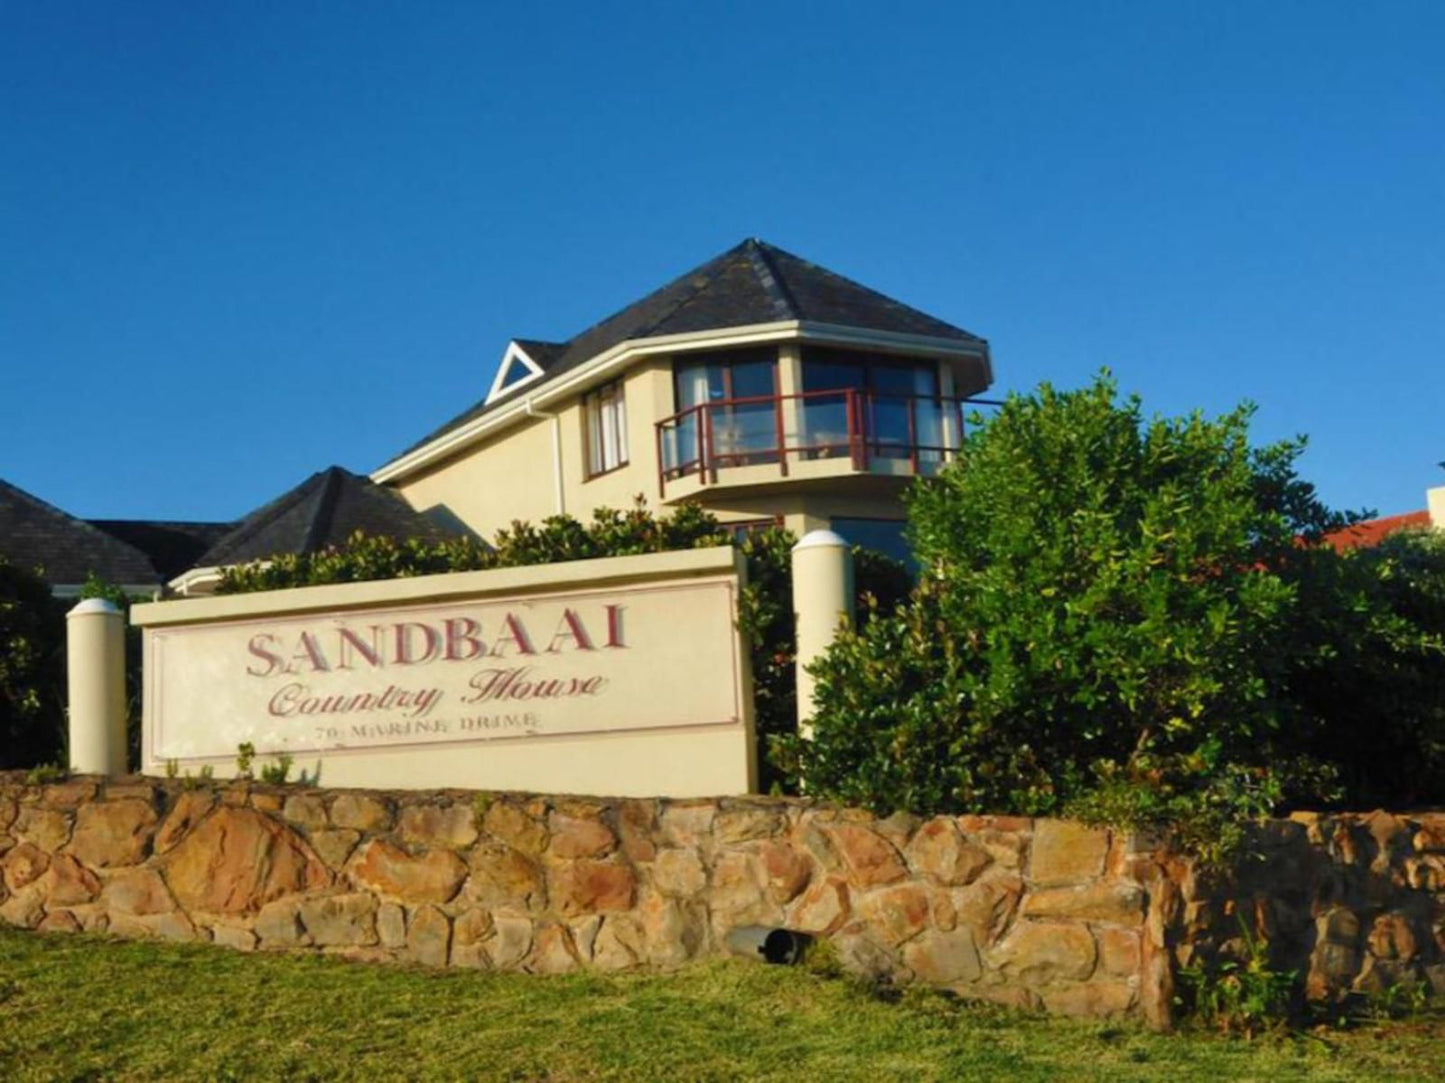 Sandbaai Country House Sandbaai Hermanus Western Cape South Africa Complementary Colors, Colorful, Building, Architecture, House